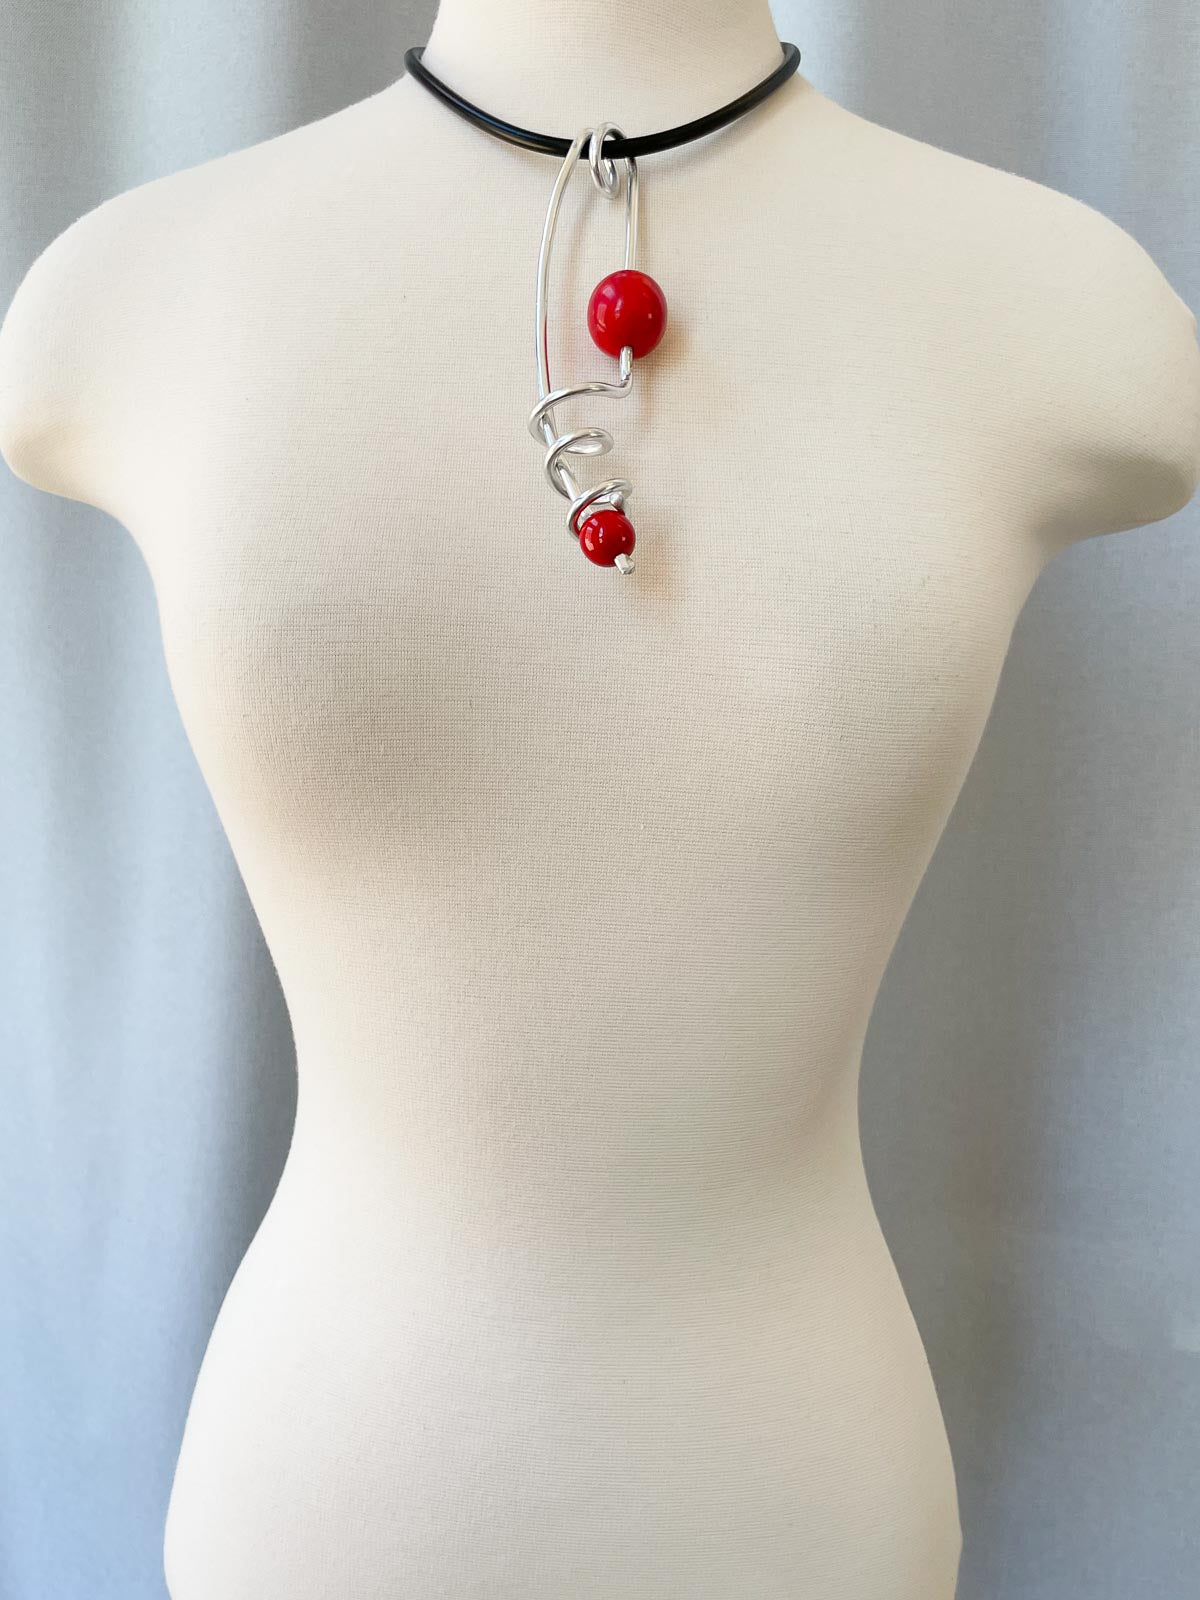 OC Jewelry Tagua Note Convertible Necklace, Red